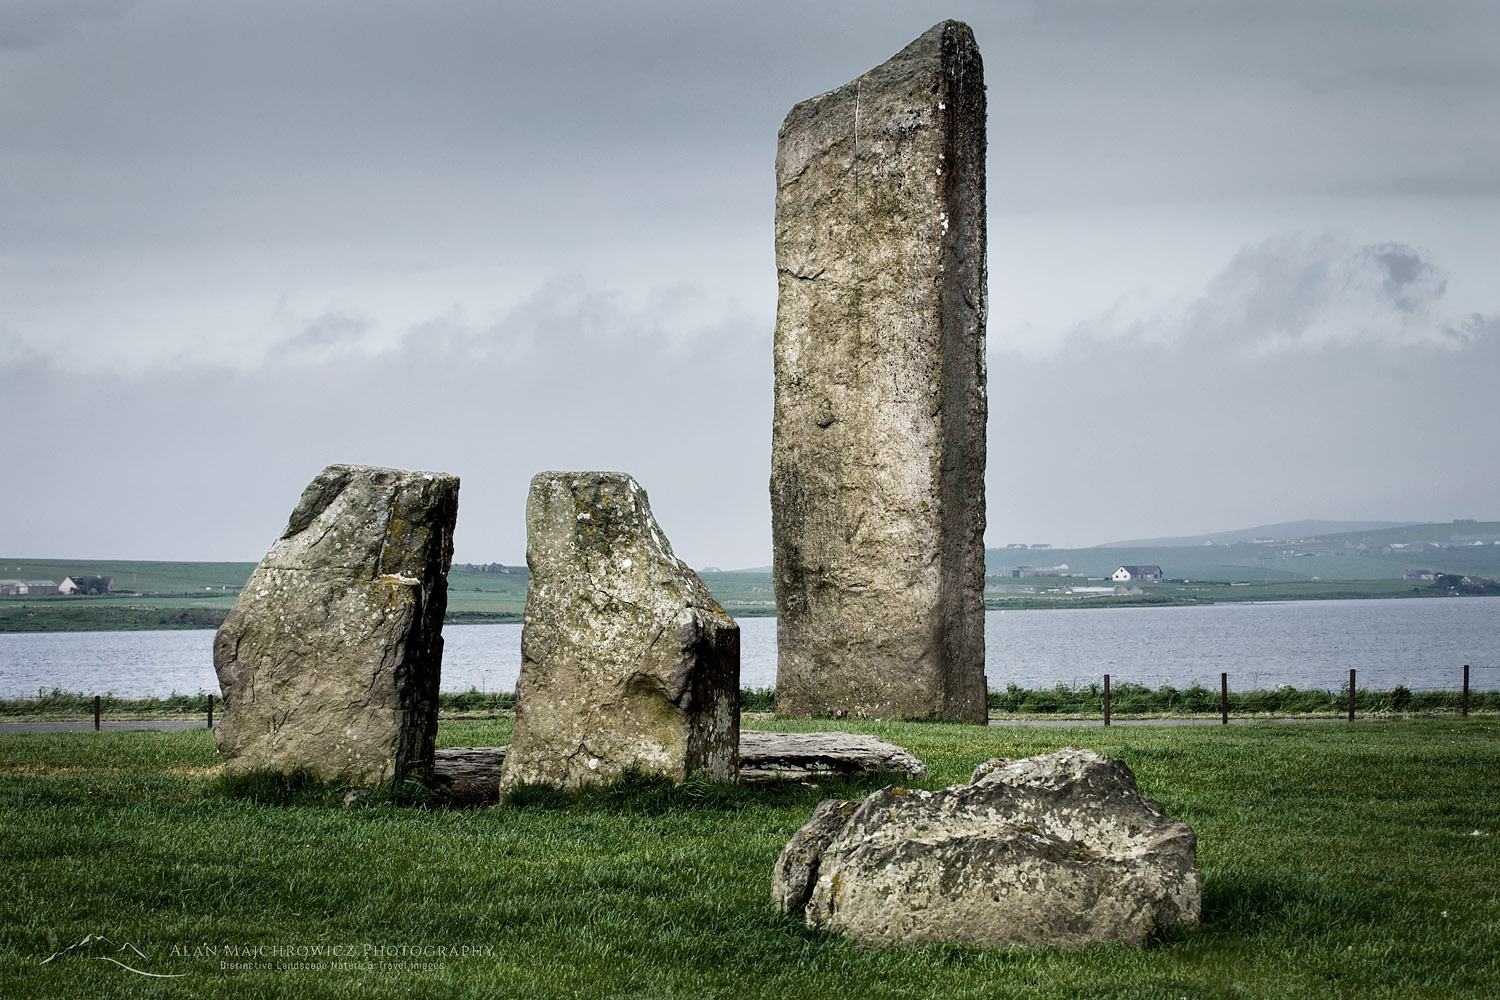 Standing Stones of Stenness, a Neolithic stone circle dating from 3100BC, Orkney Islands Scotland #12601r